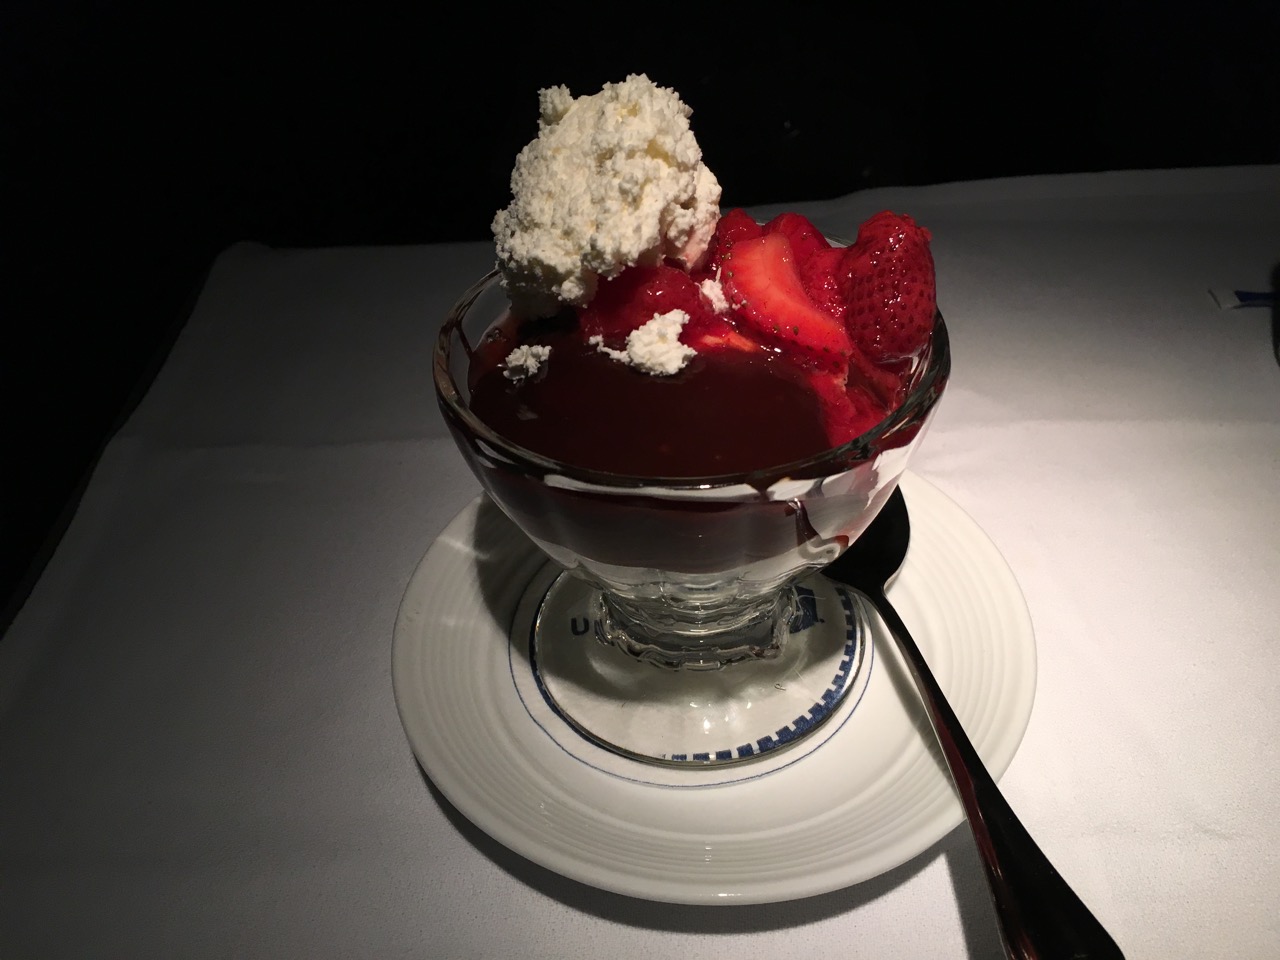 Gelato with Whipped Cream, Chocolate Sauce, and Strawberries